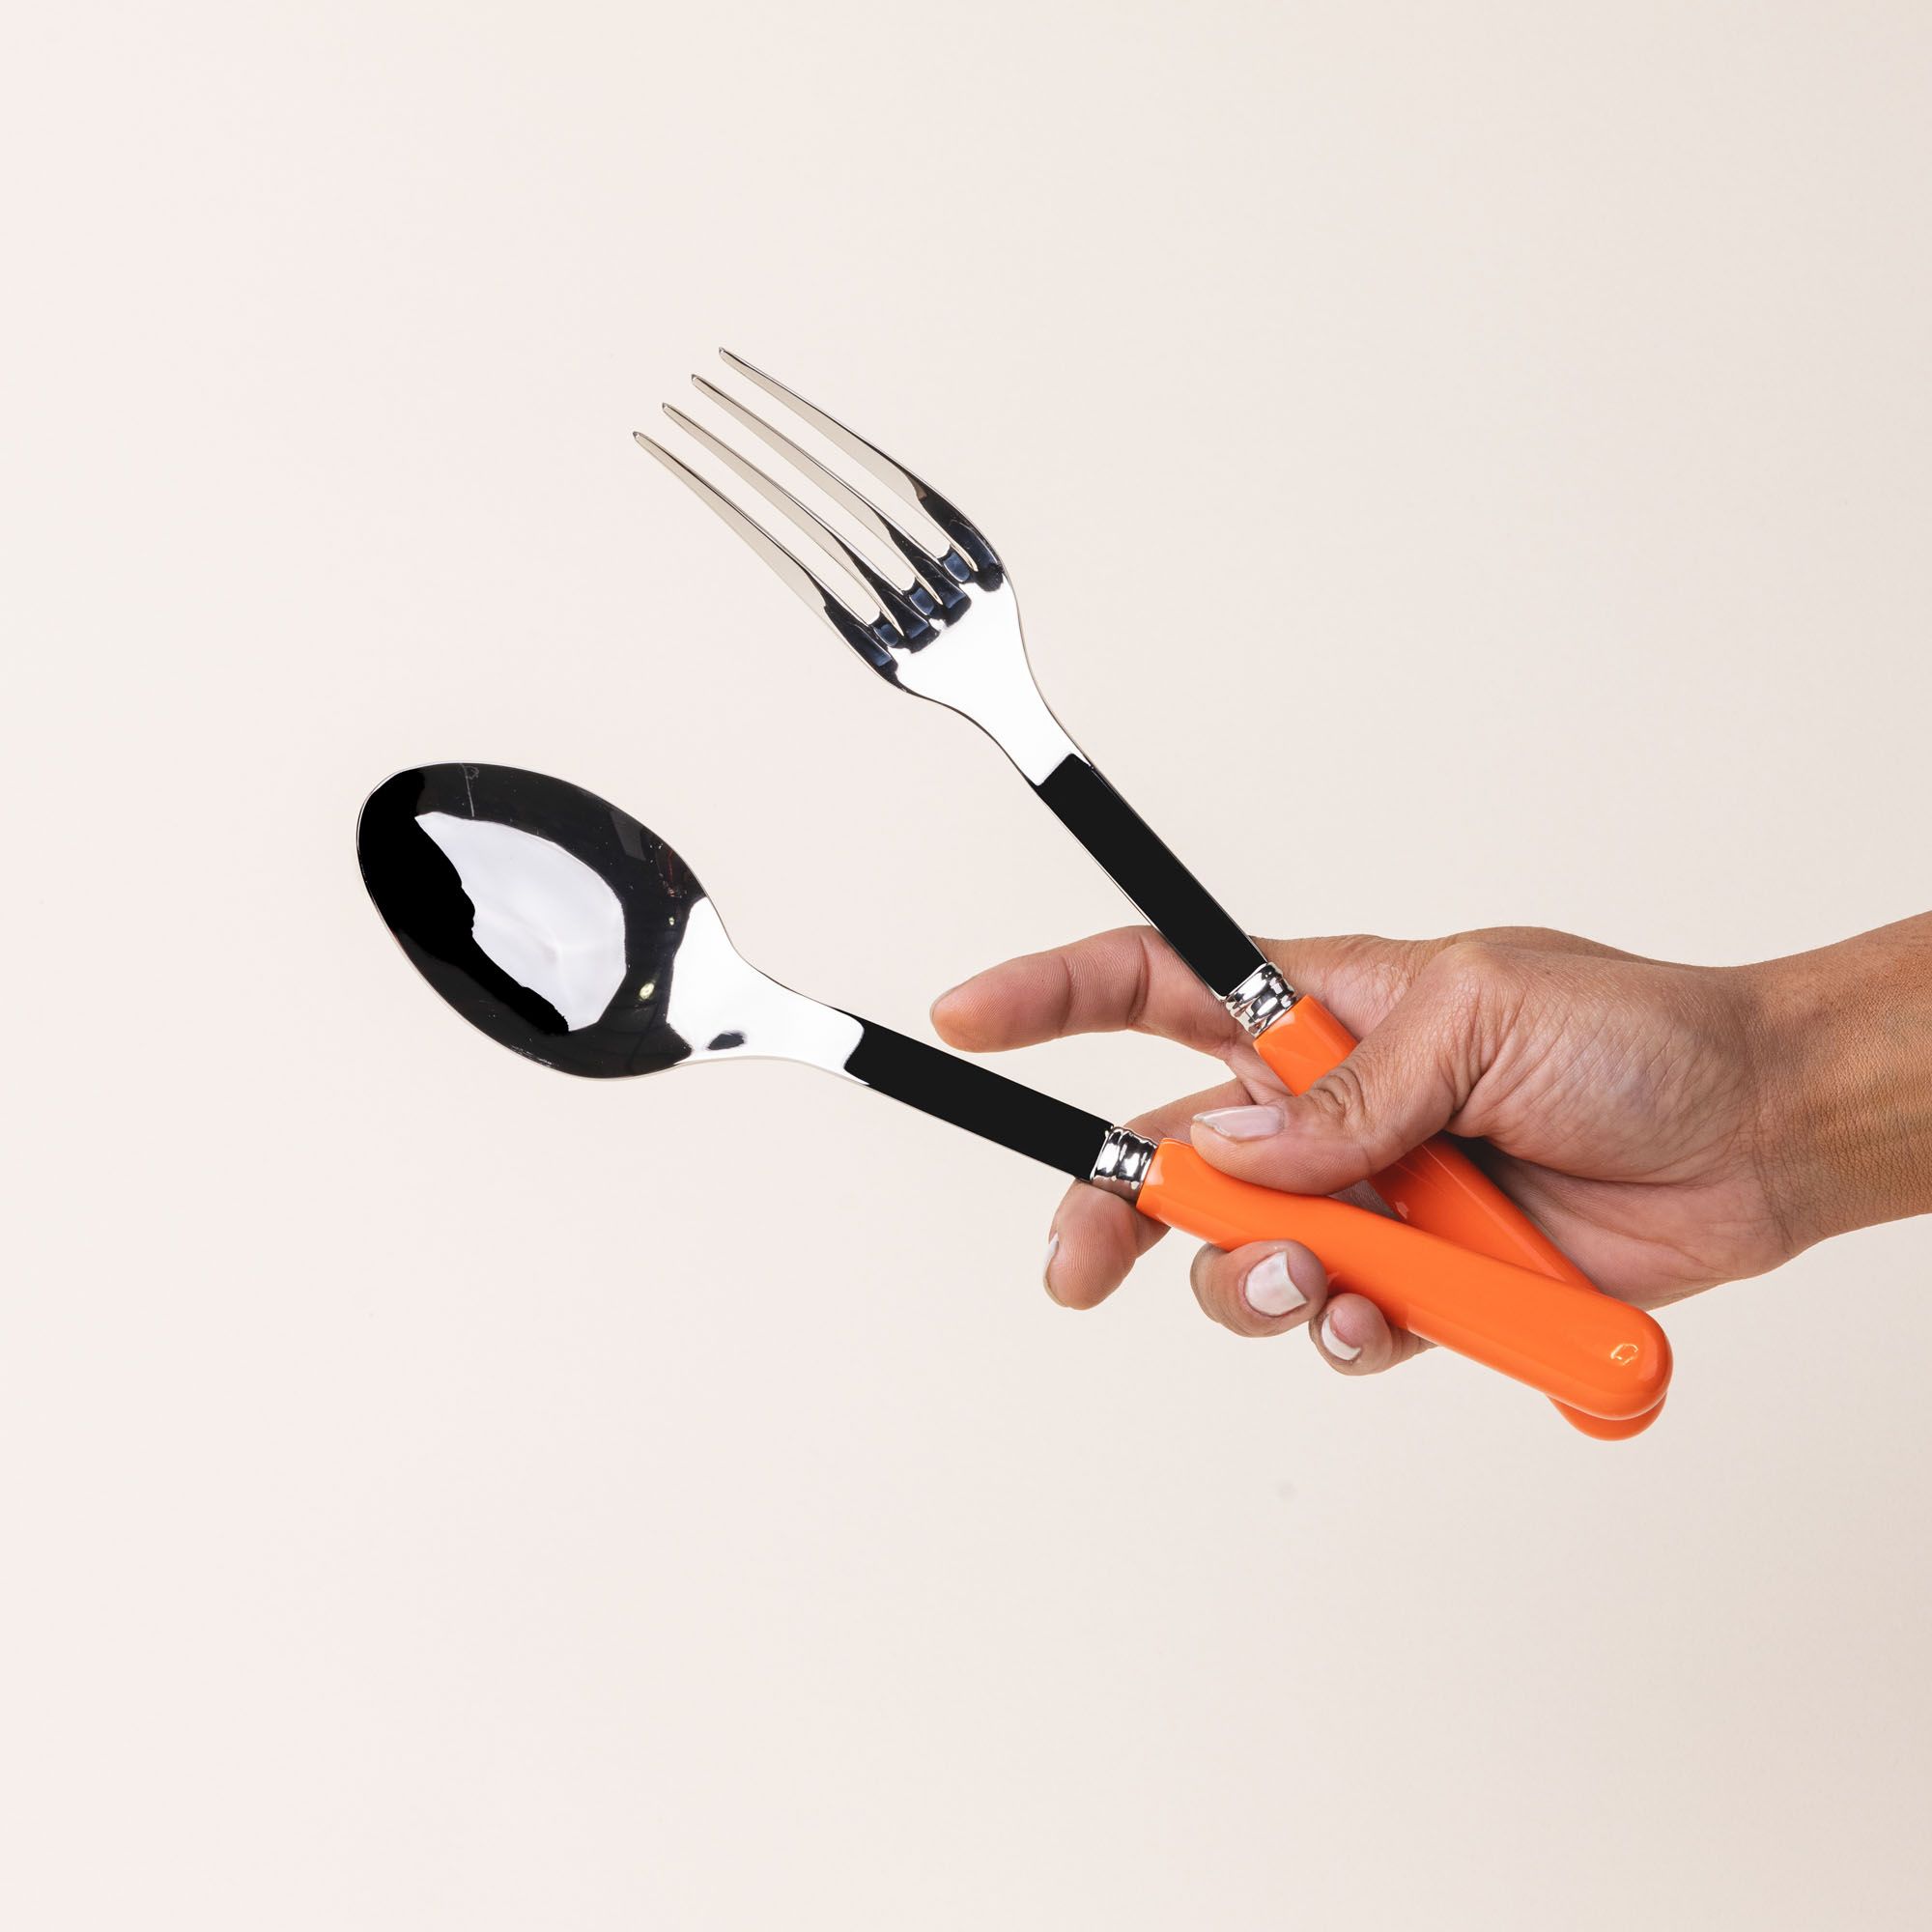 A hand holds a serving size spoon and fork in a shiny steel with a bold orange handle